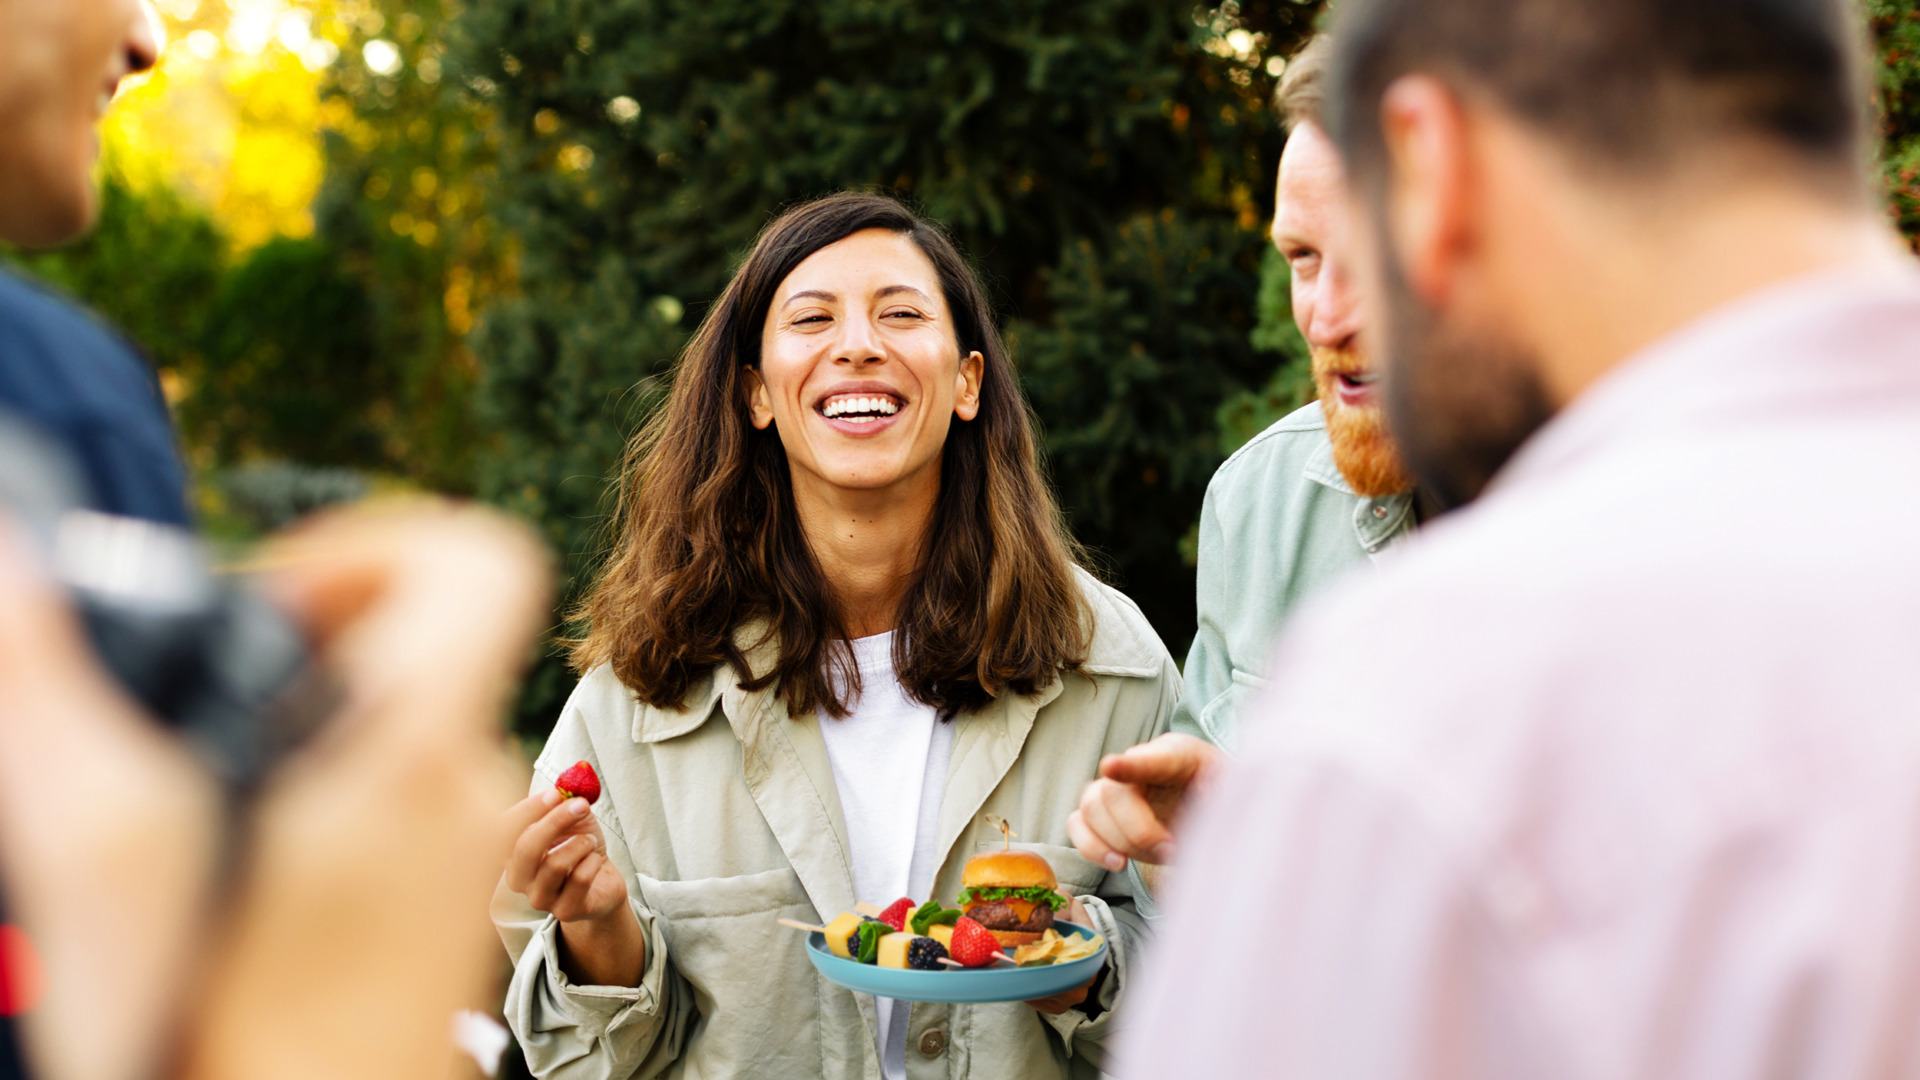 Image of woman eating strawberry at a barbeque